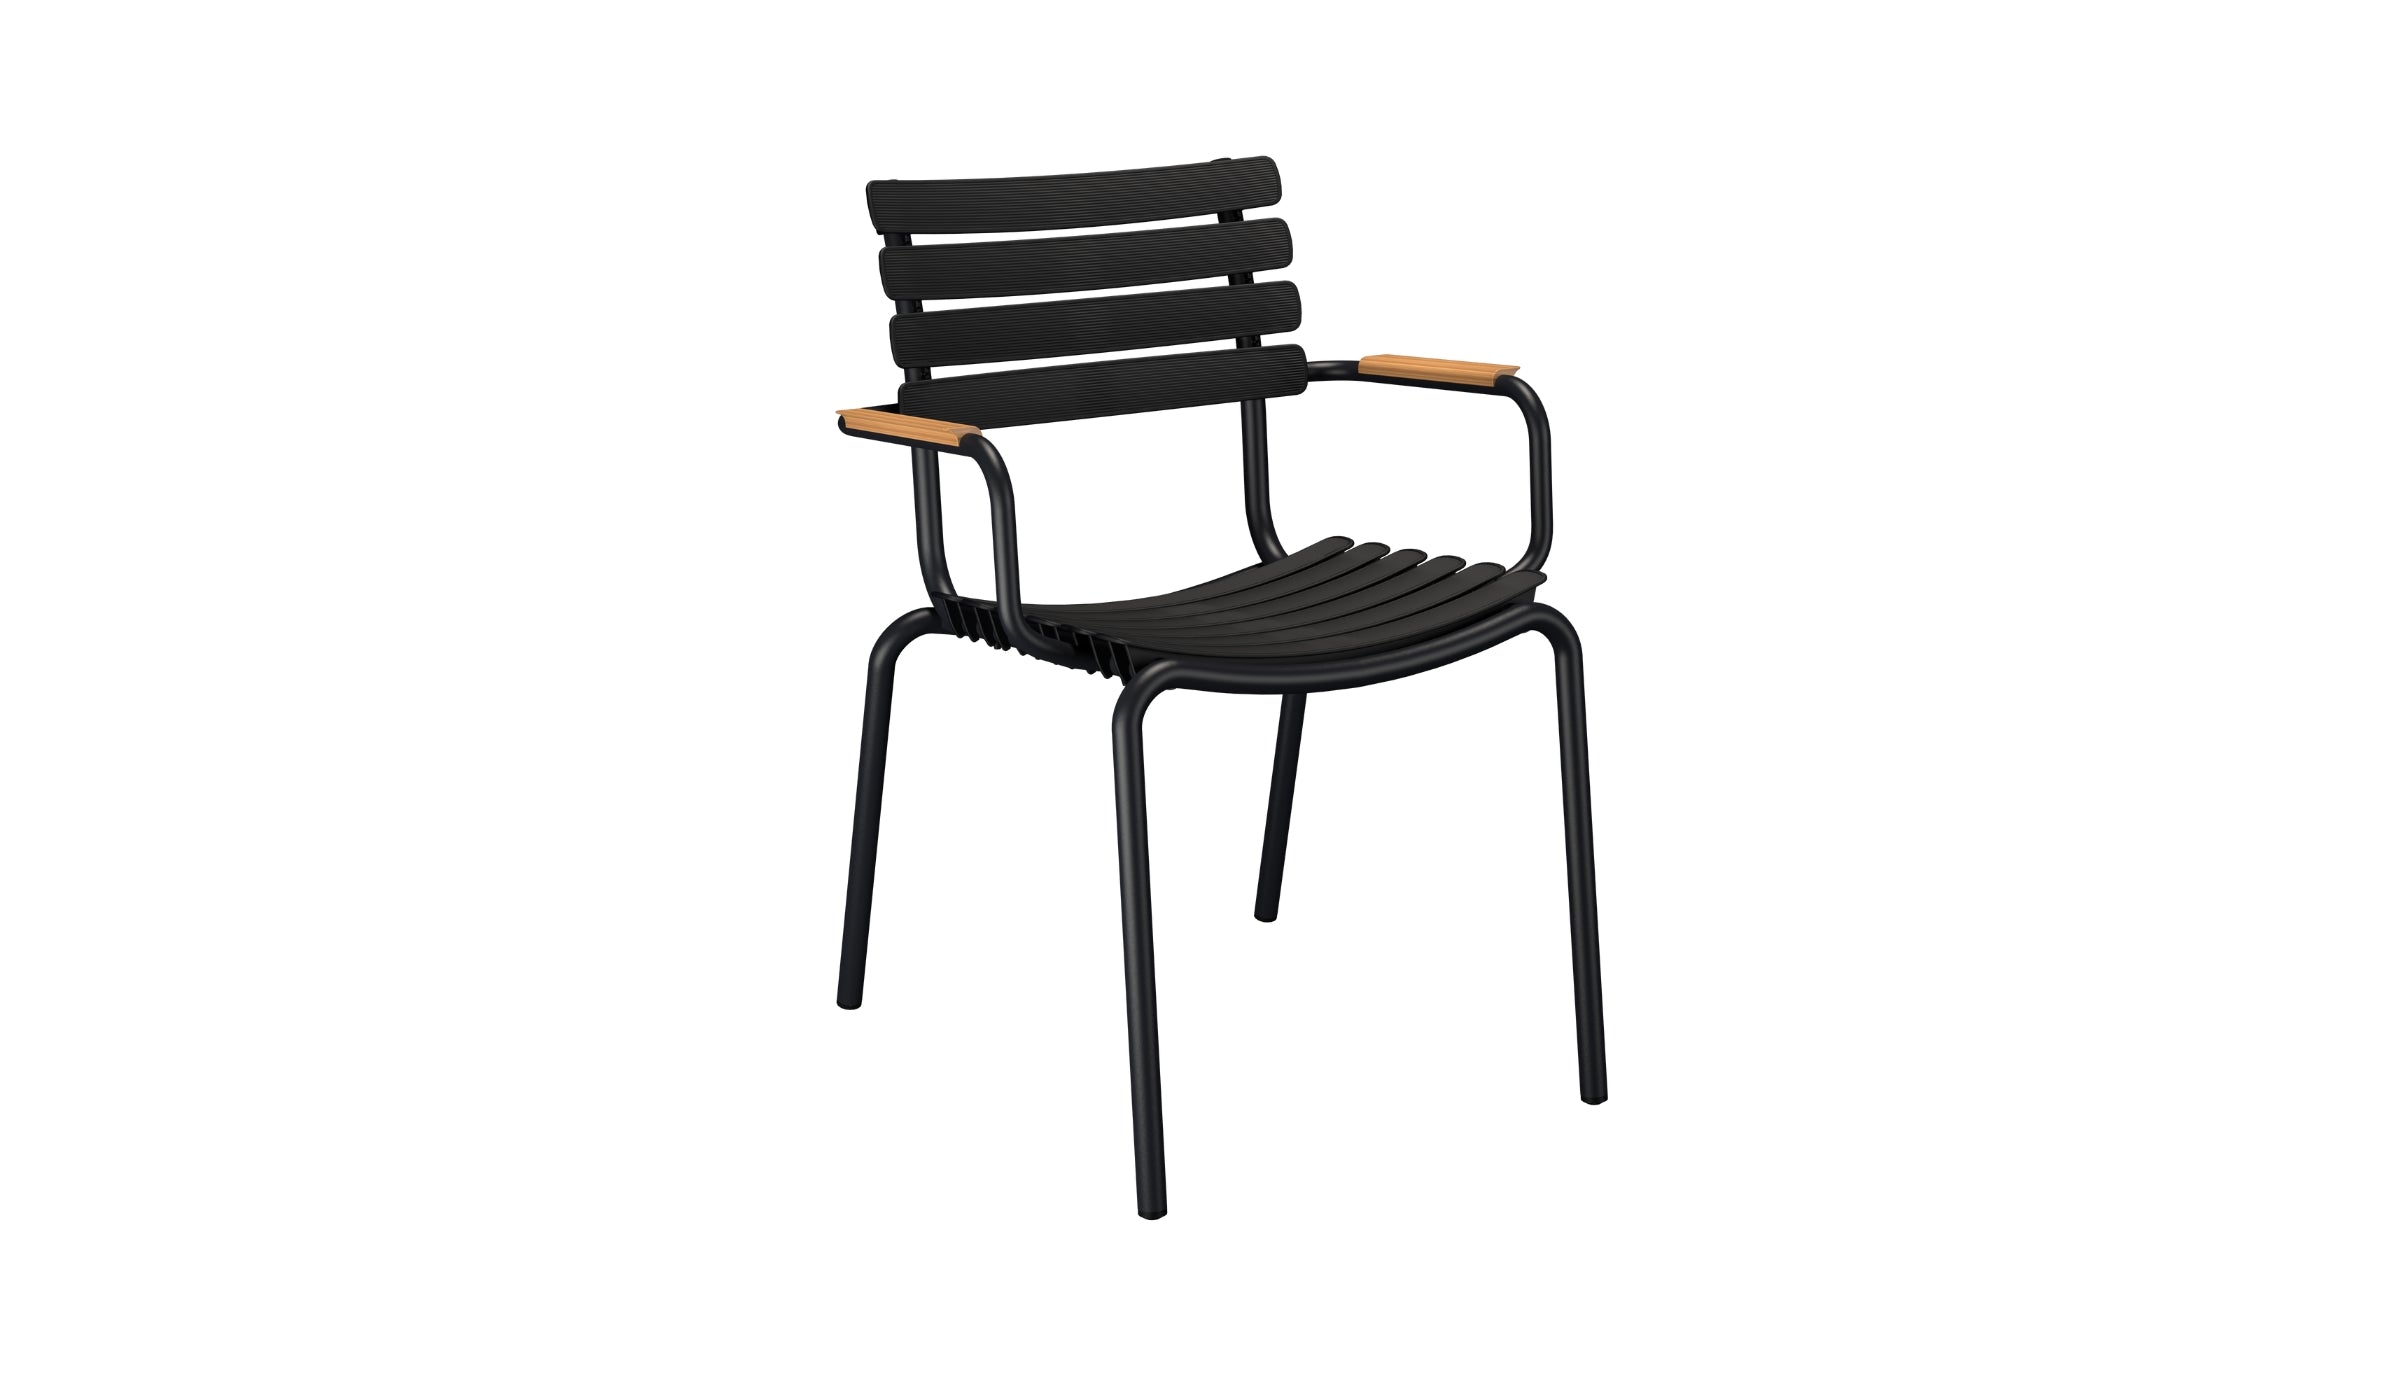 Reclips - Outdoor chair in aluminum and recycled plastic with bamboo armrests, black